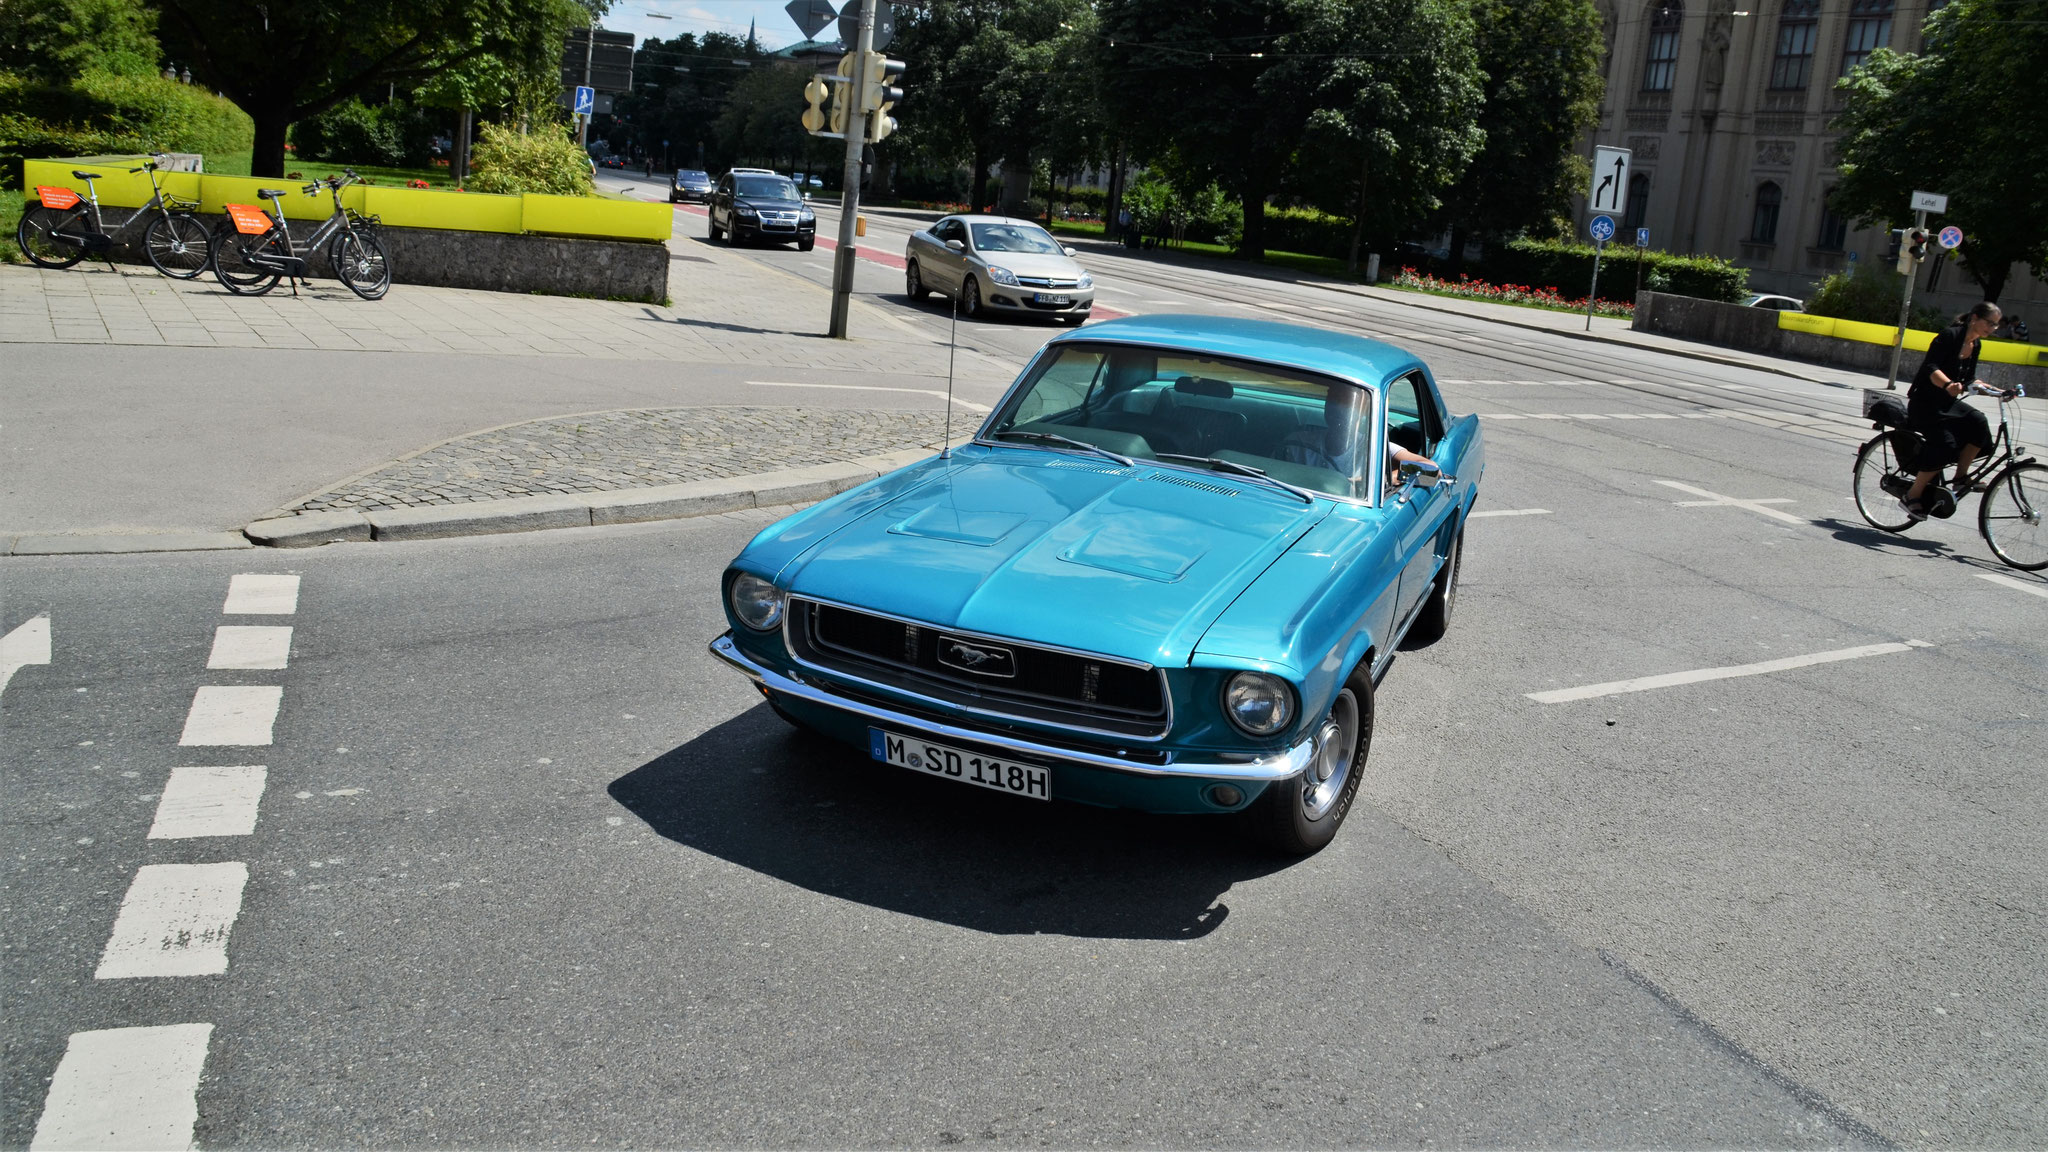 Mustang I - M-SD118H